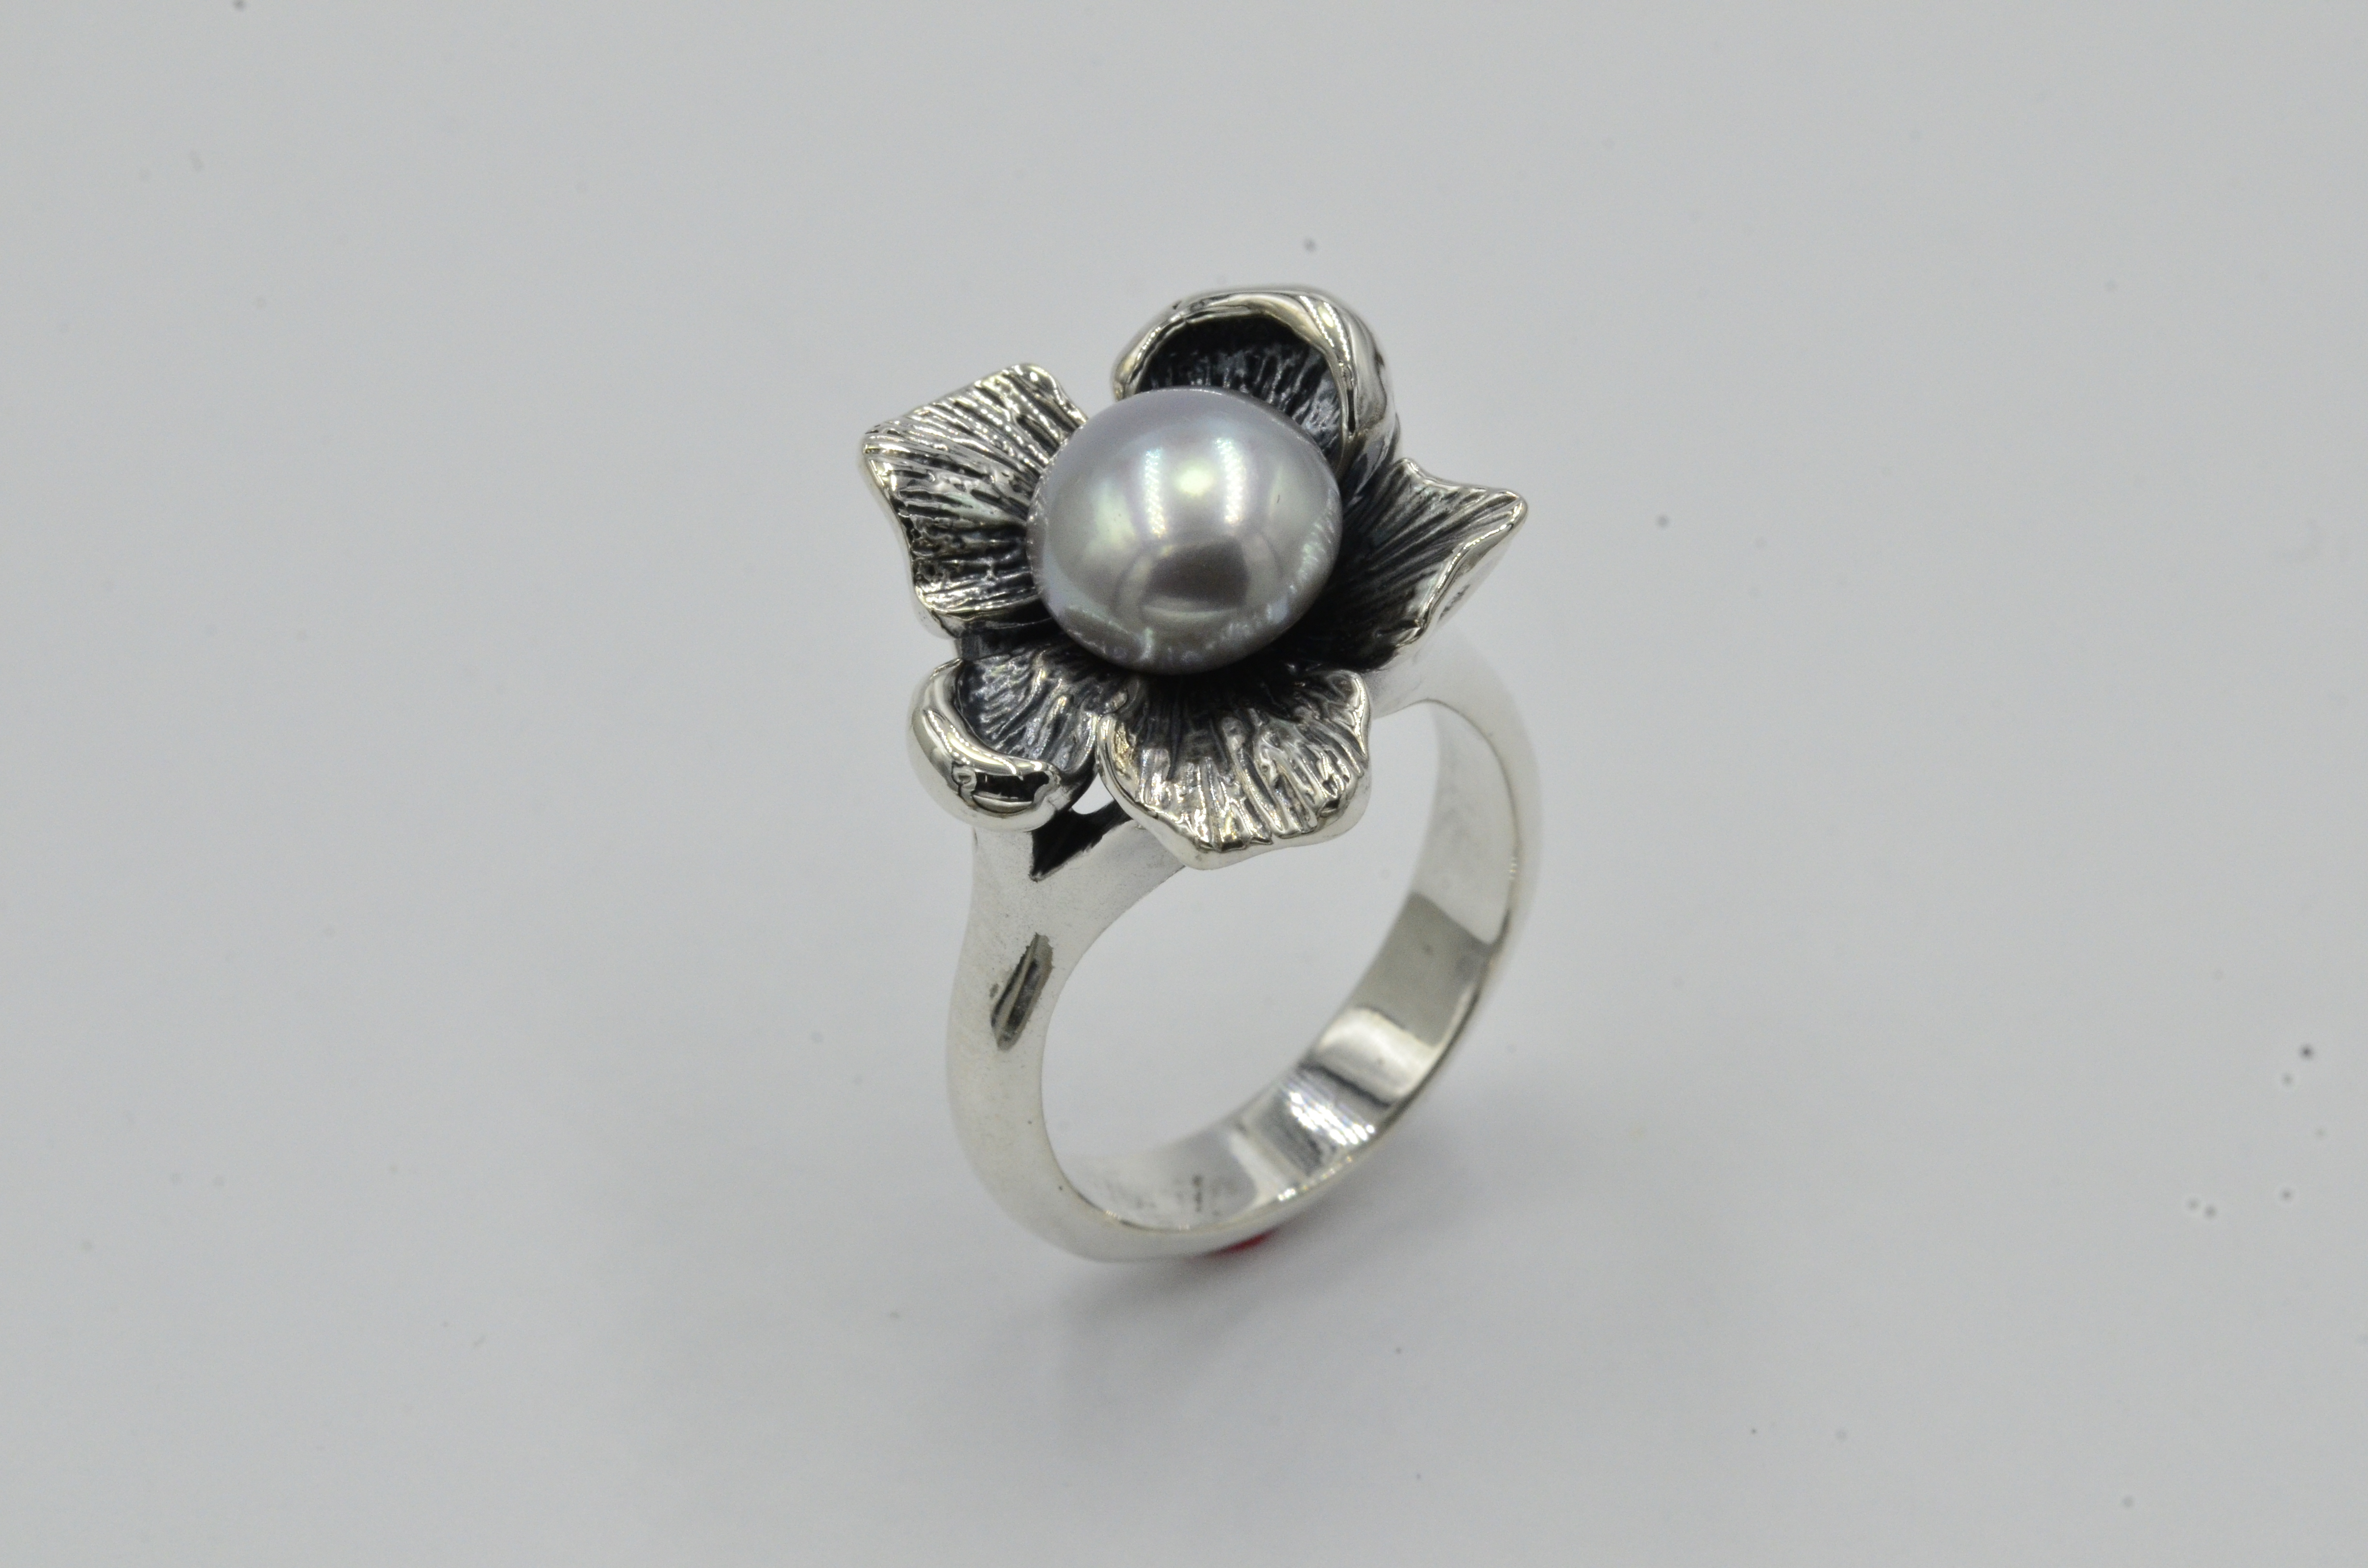 Hand crafted abstract Flower ring. Very popular gift that girlfriends chip in on when one of the girls has a special birthday.